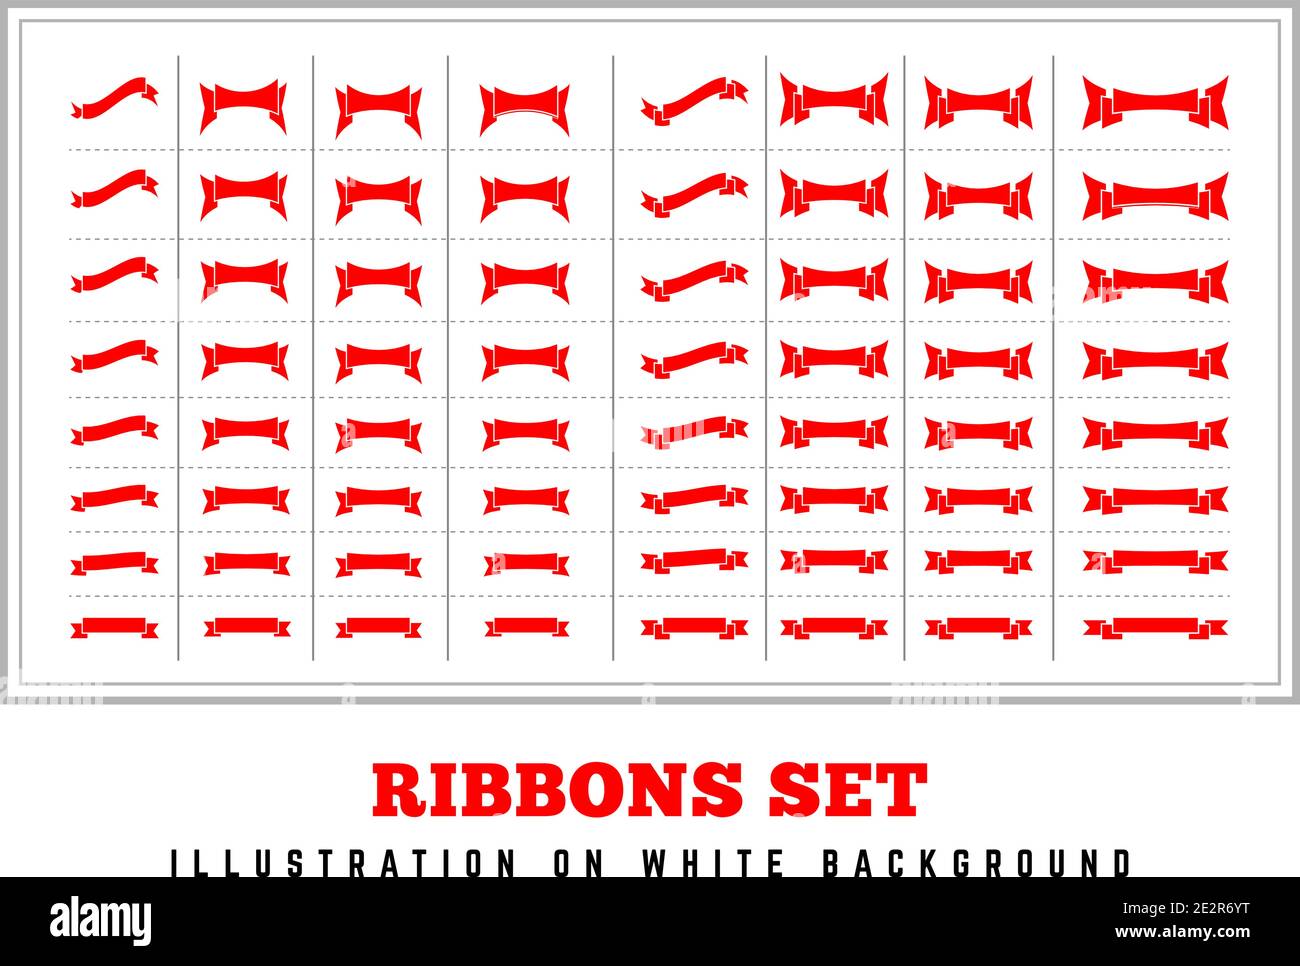 Ribbons vector set illustration isolated on white background Stock Vector